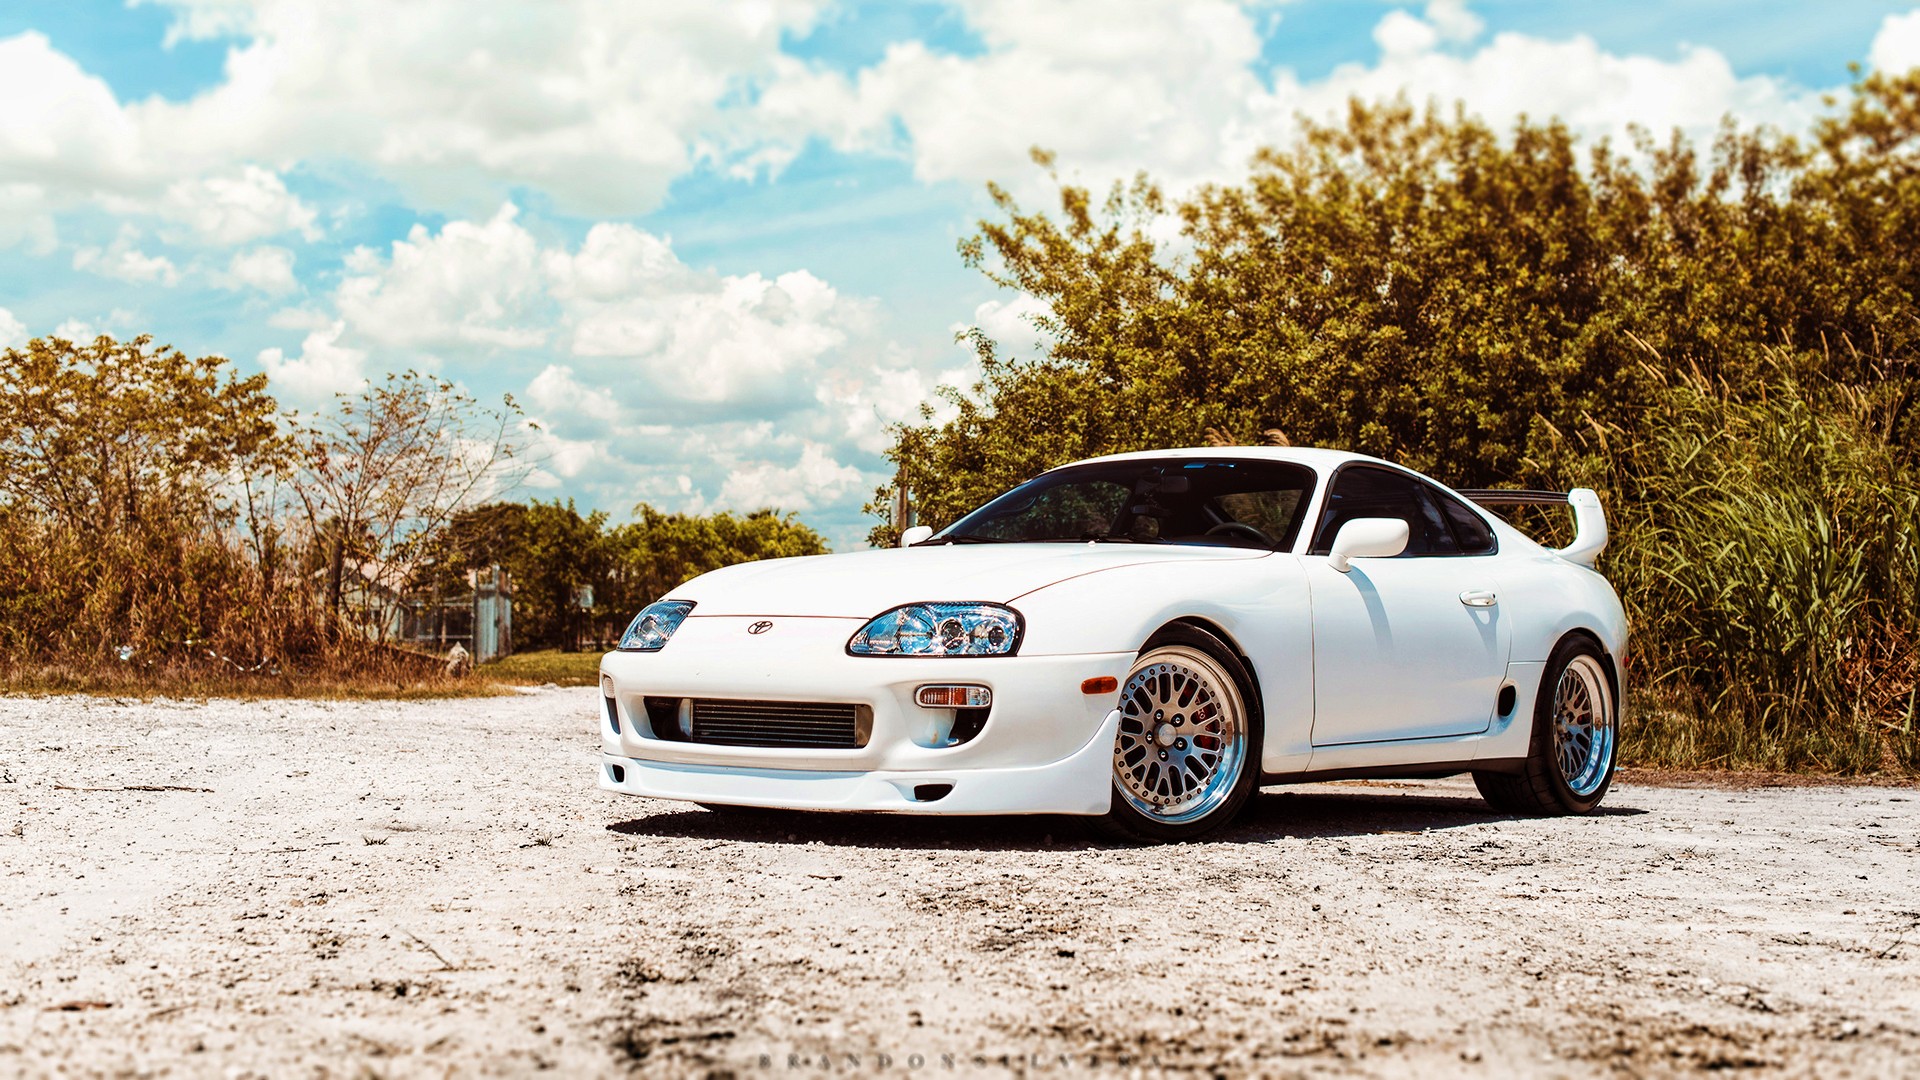 Free download Toyota Supra Wallpapers HD Desktop and Mobile Backgrounds